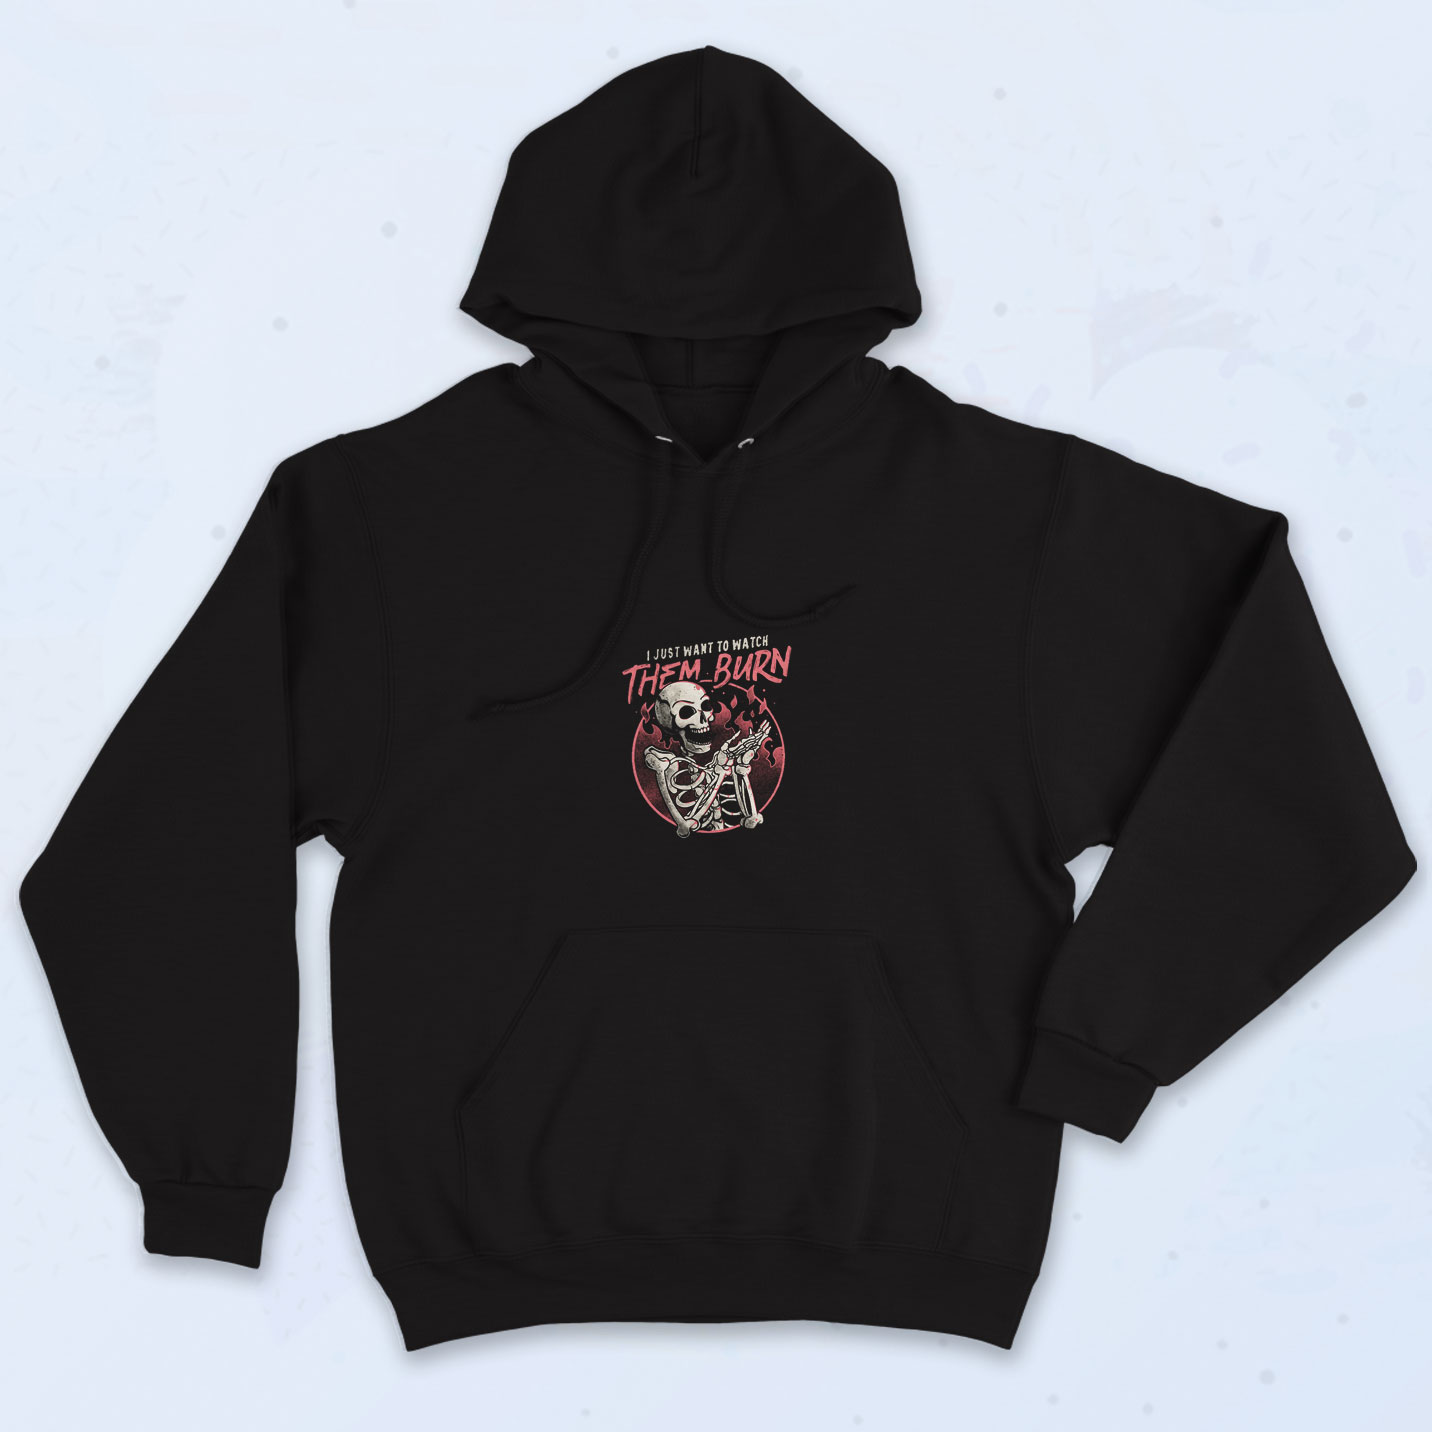 Watch Them Burn Skull Graphic Hoodie - 90sclothes.com